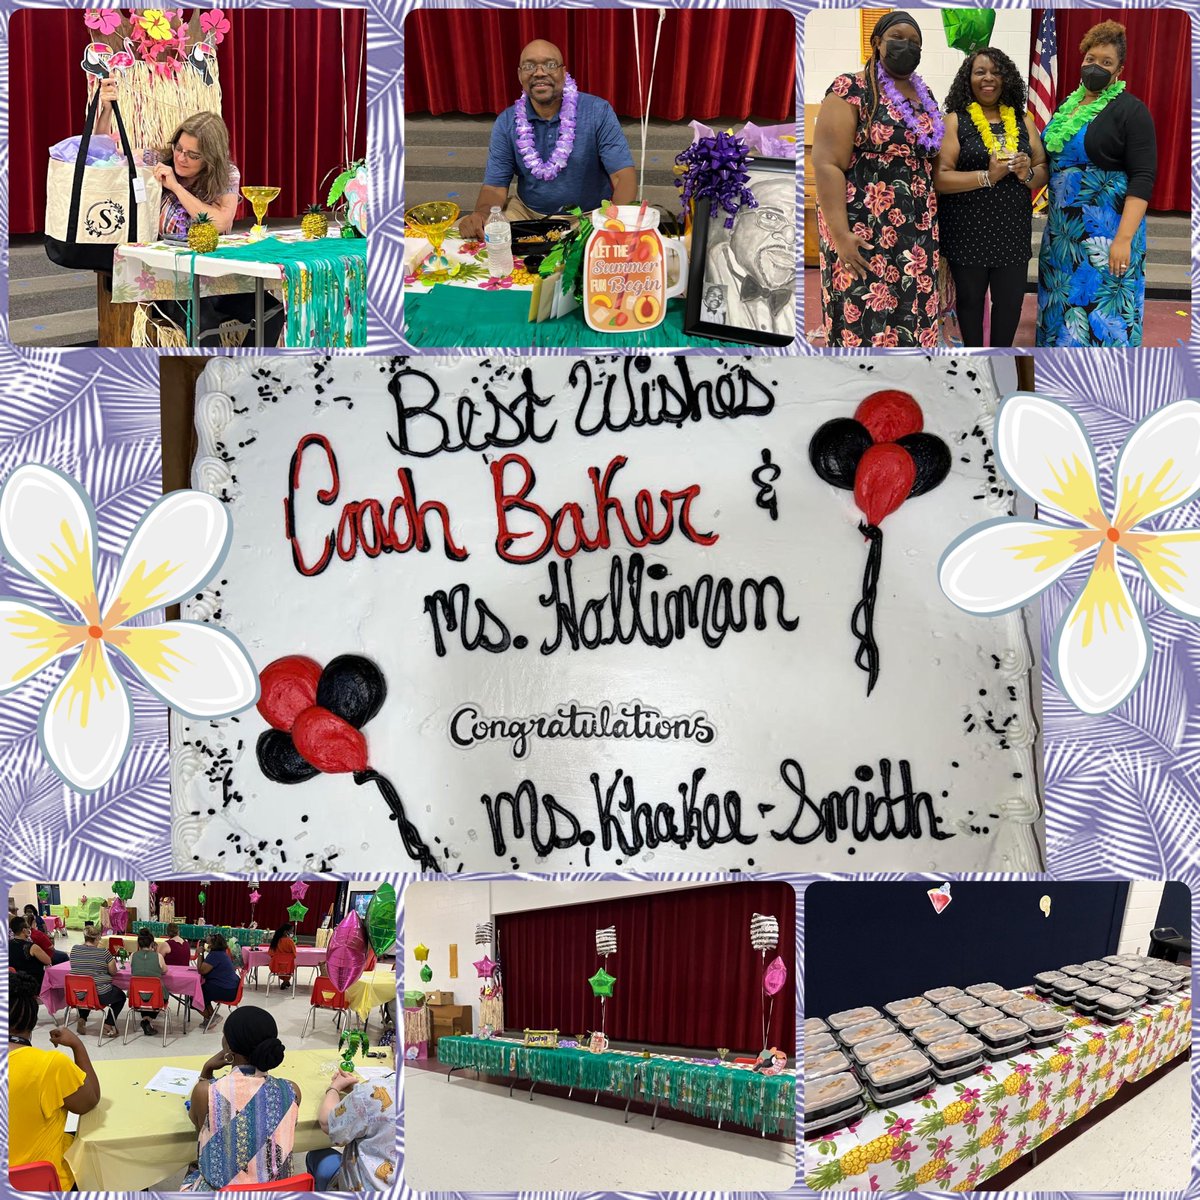 We celebrated our Teacher of the Year and Retirees with a Luau Luncheon. Congratulations to Mrs. Susan Khakee-Smith our Teacher of the Year, and Best Wishes on your Retirement to both Mrs. Elaine Holliman and Mr. Jenson Baker @KarlaJakubowski @APladyT @EdSherri @PortsVASchools